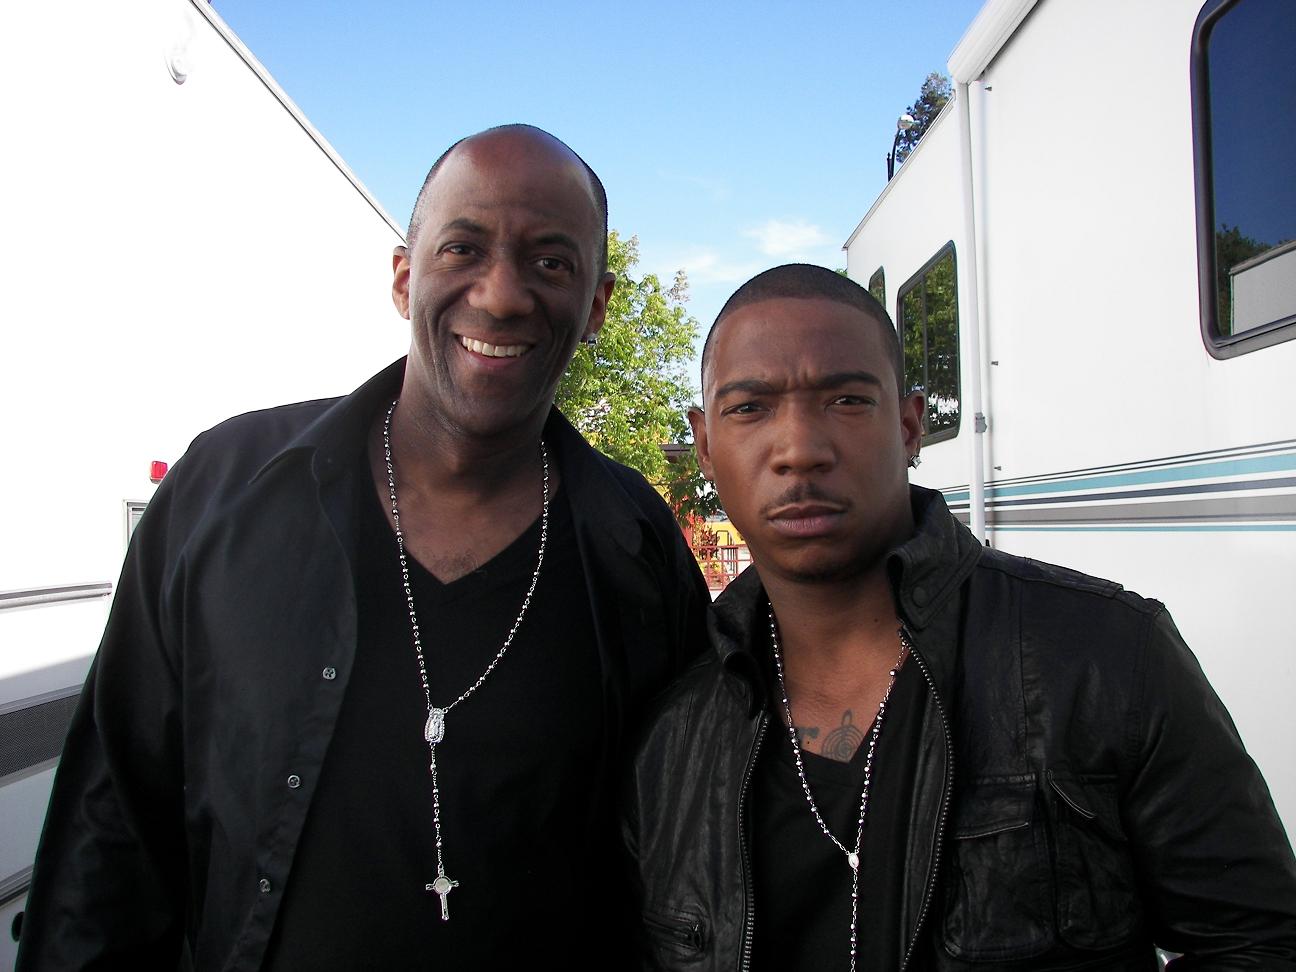 Jeff Mosley and Ja Rule on the set of 